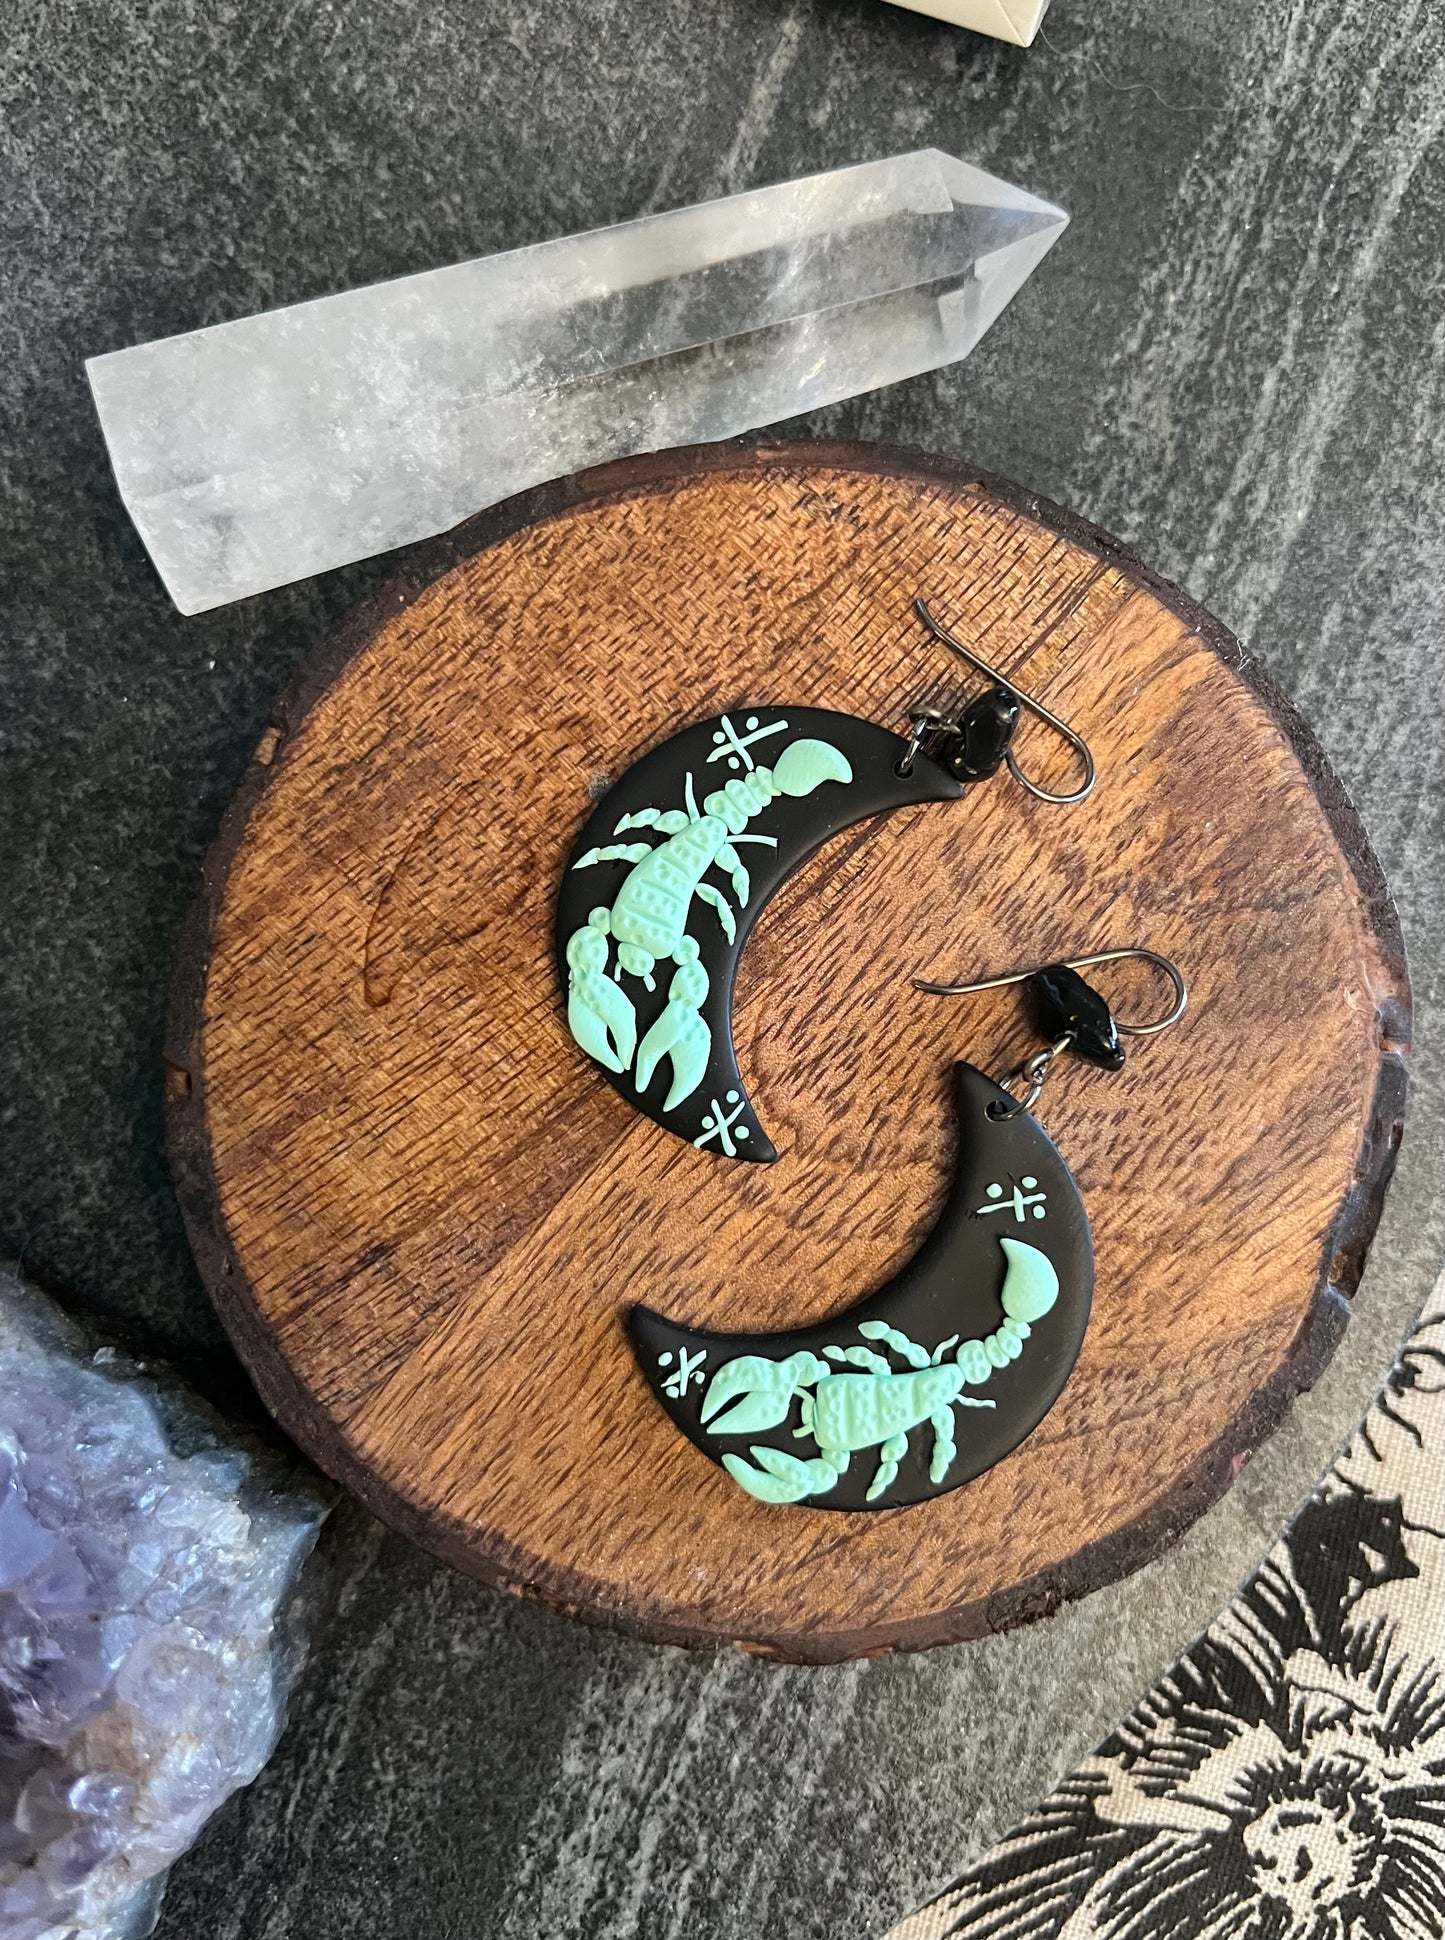 Unique polymer clay Scorpio earrings with obsidian healing crystal accent. Handcrafted designs celebrate your zodiac sign while harnessing the protective and grounding energy of obsidian. Elevate your style and spiritual energy with these artisanal earrings. Shop now!